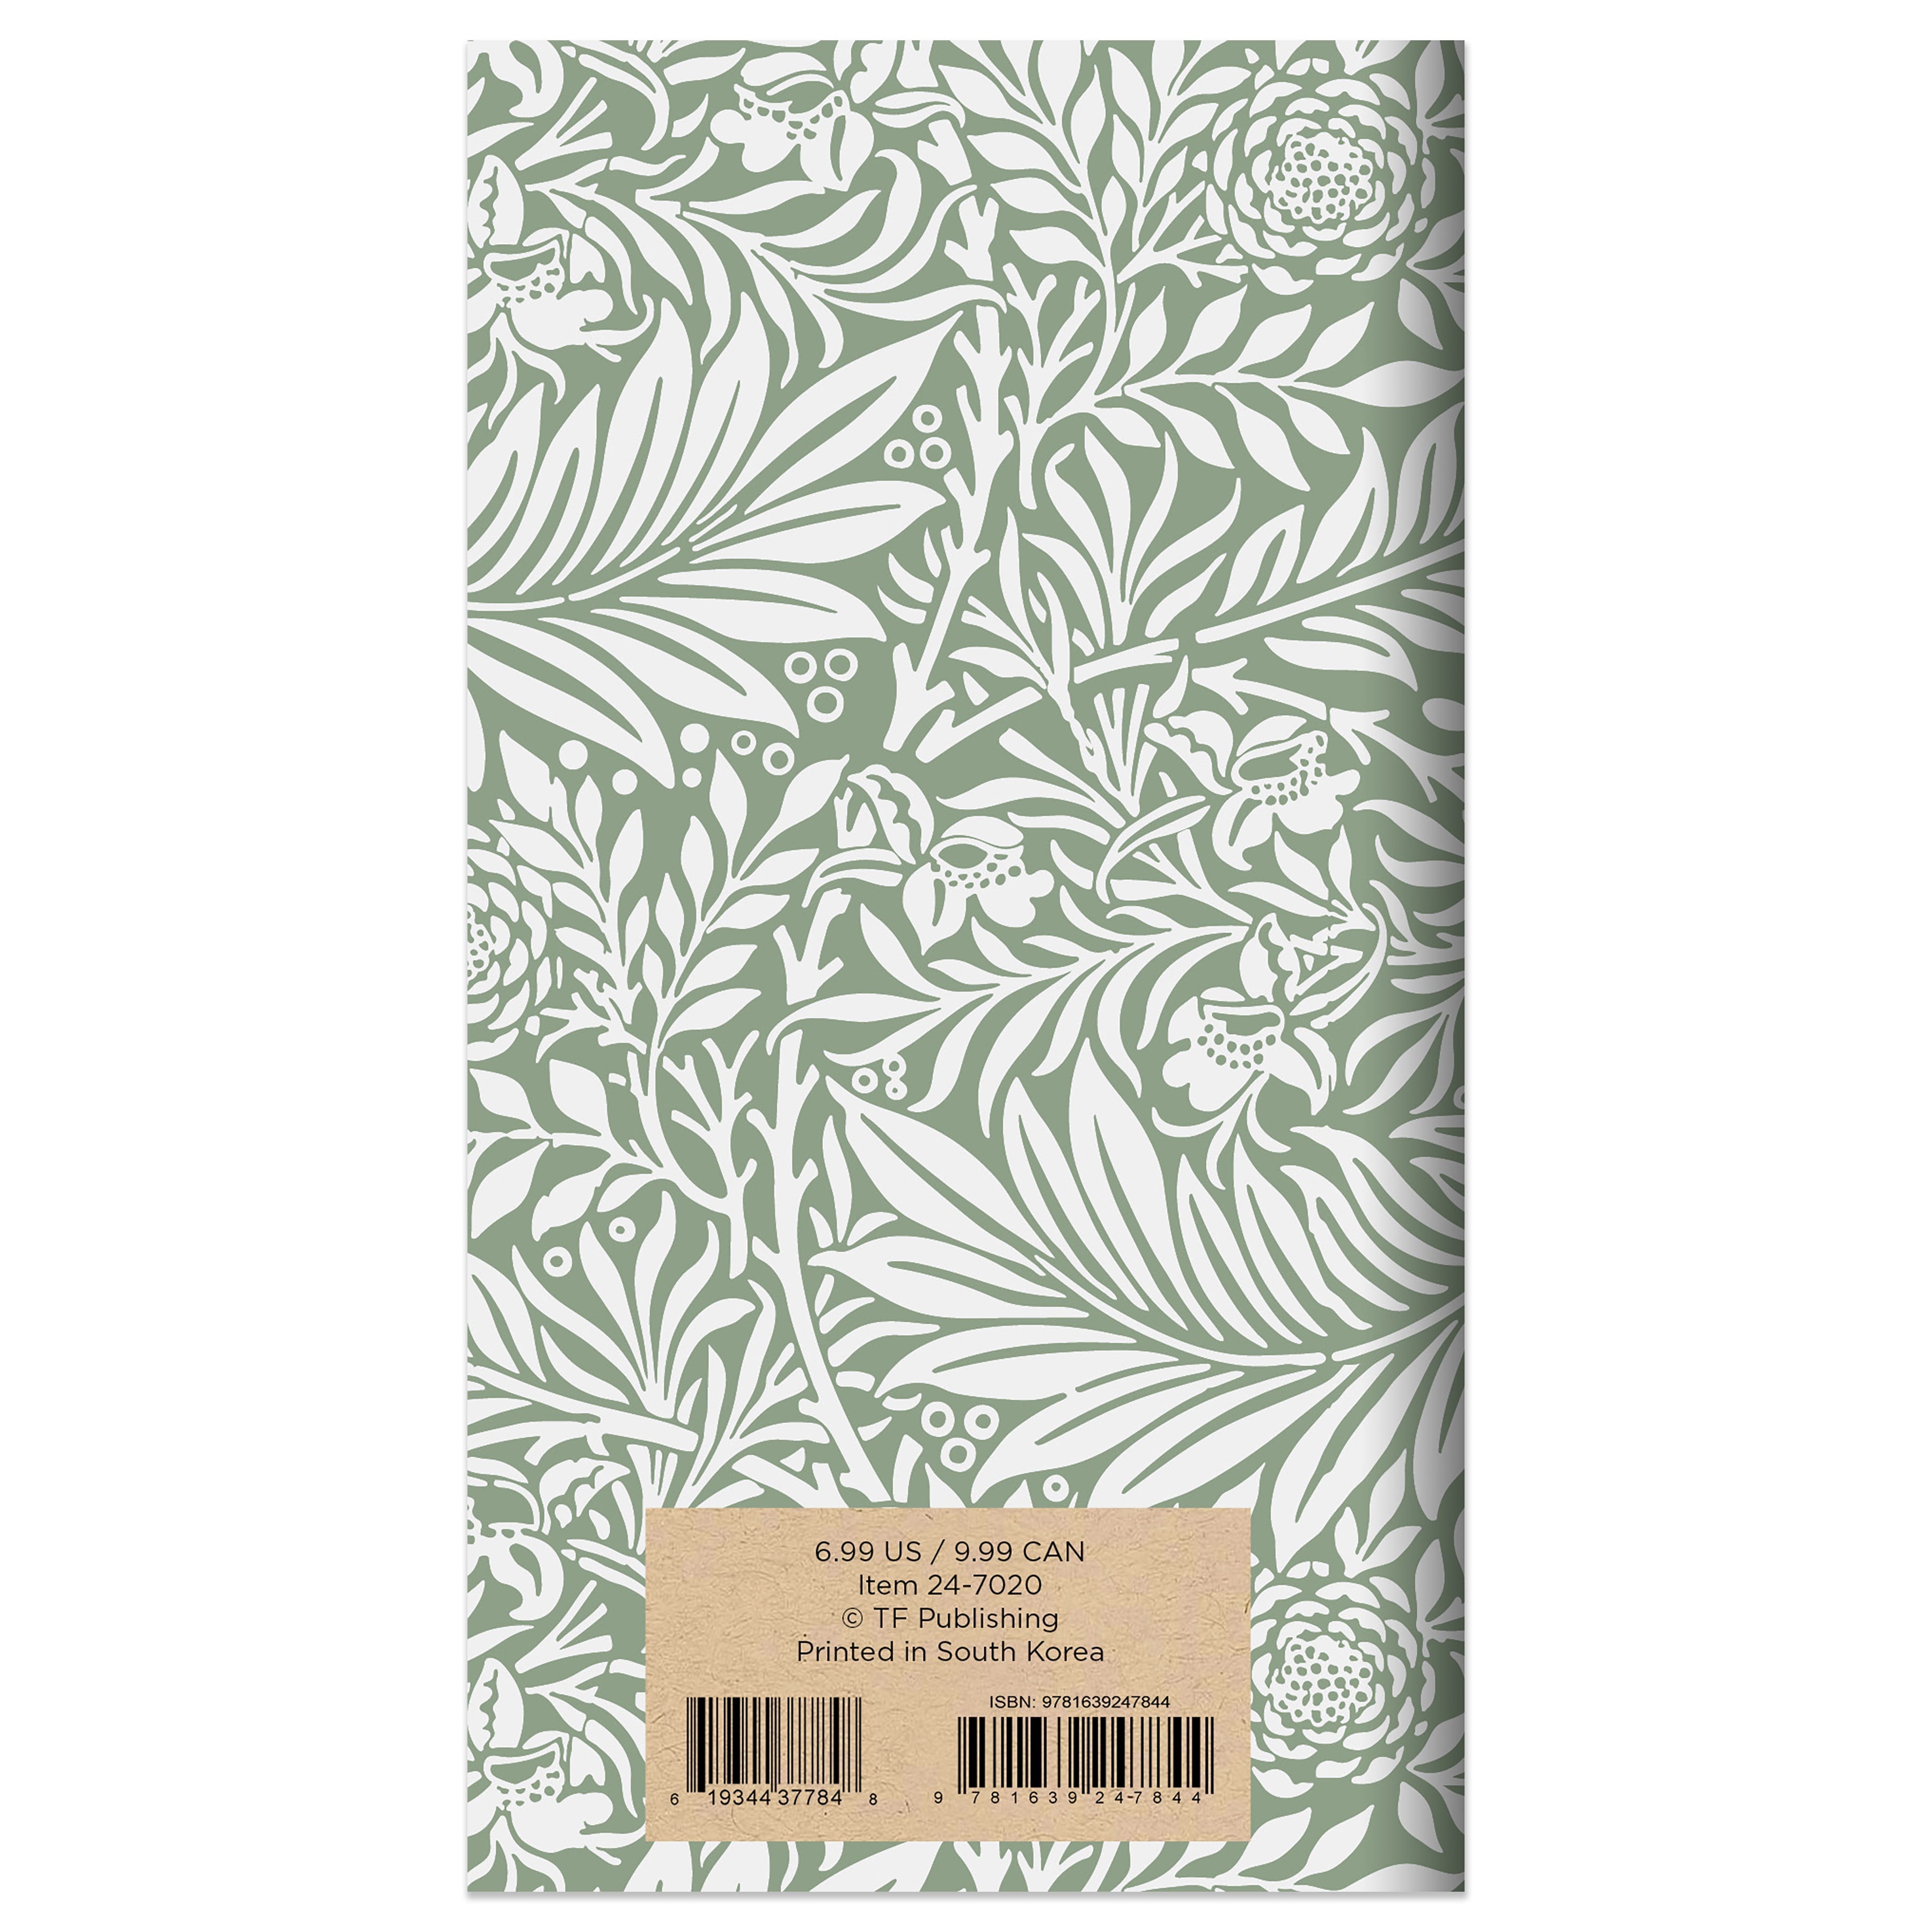 2024-2025 Earthly Toile - Small Monthly Pocket Diary/Planner